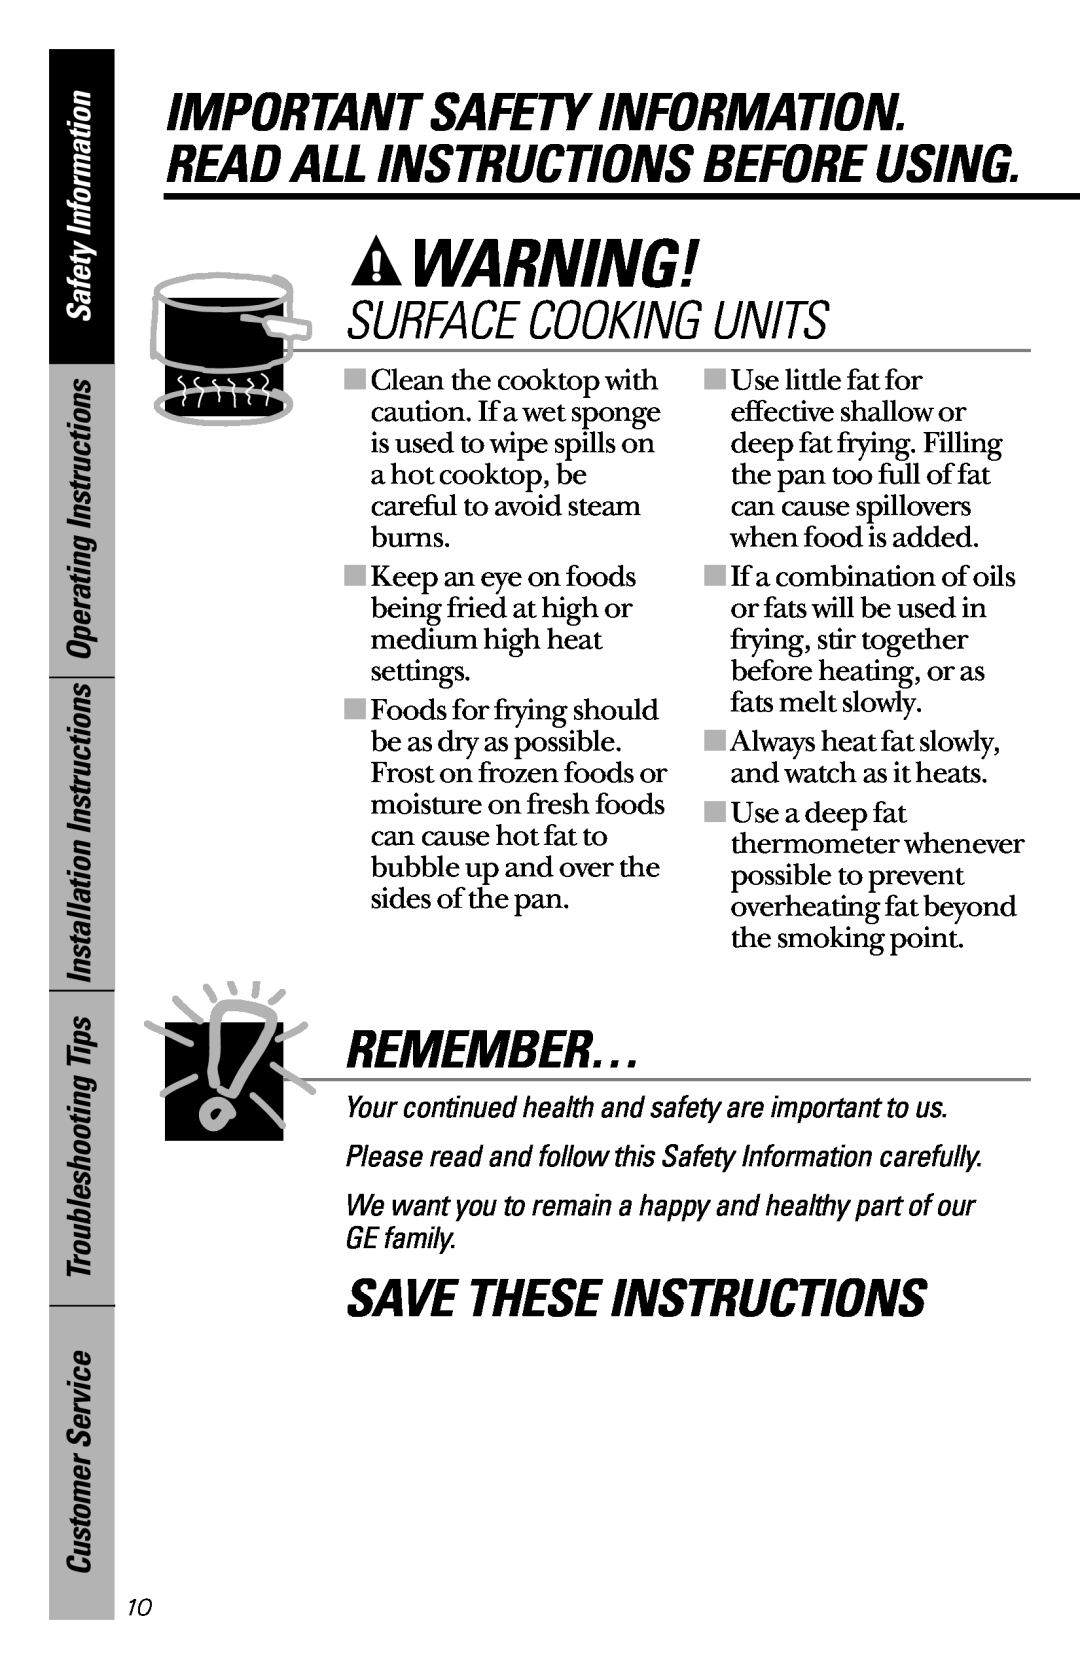 GE 164D3333P172 Customer Service Troubleshooting Tips, Surface Cooking Units, Remember…, Save These Instructions 